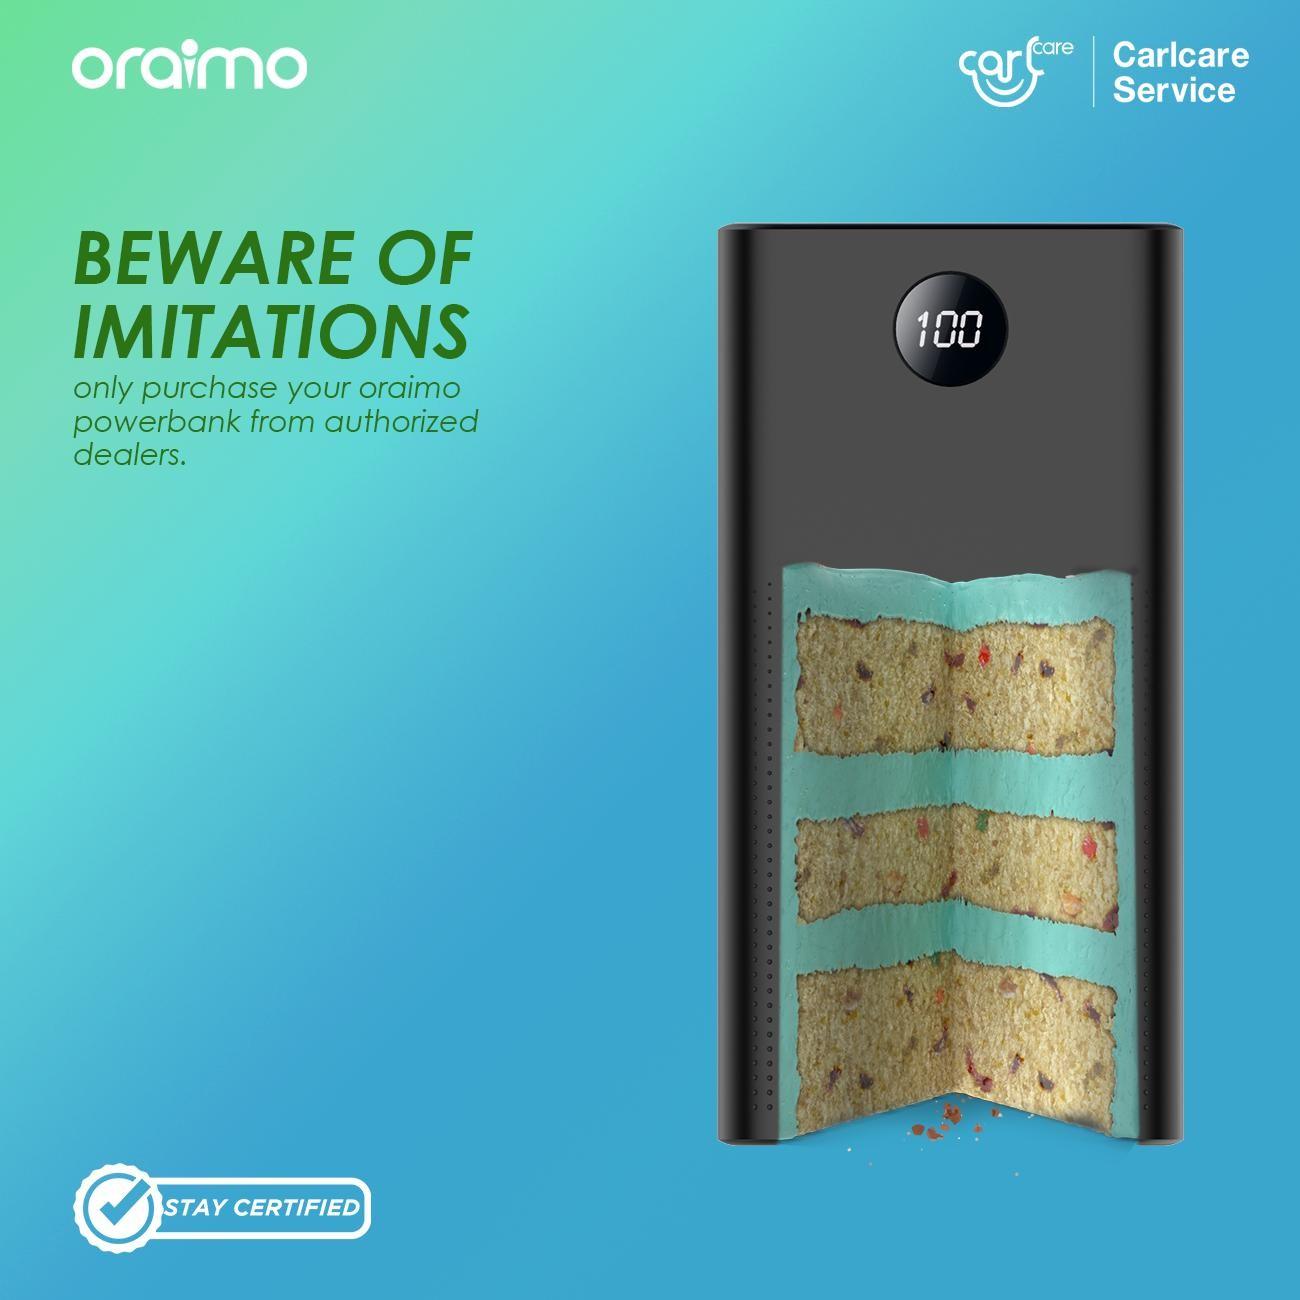 oraimo's Power Series: Setting New Standards in Quality and